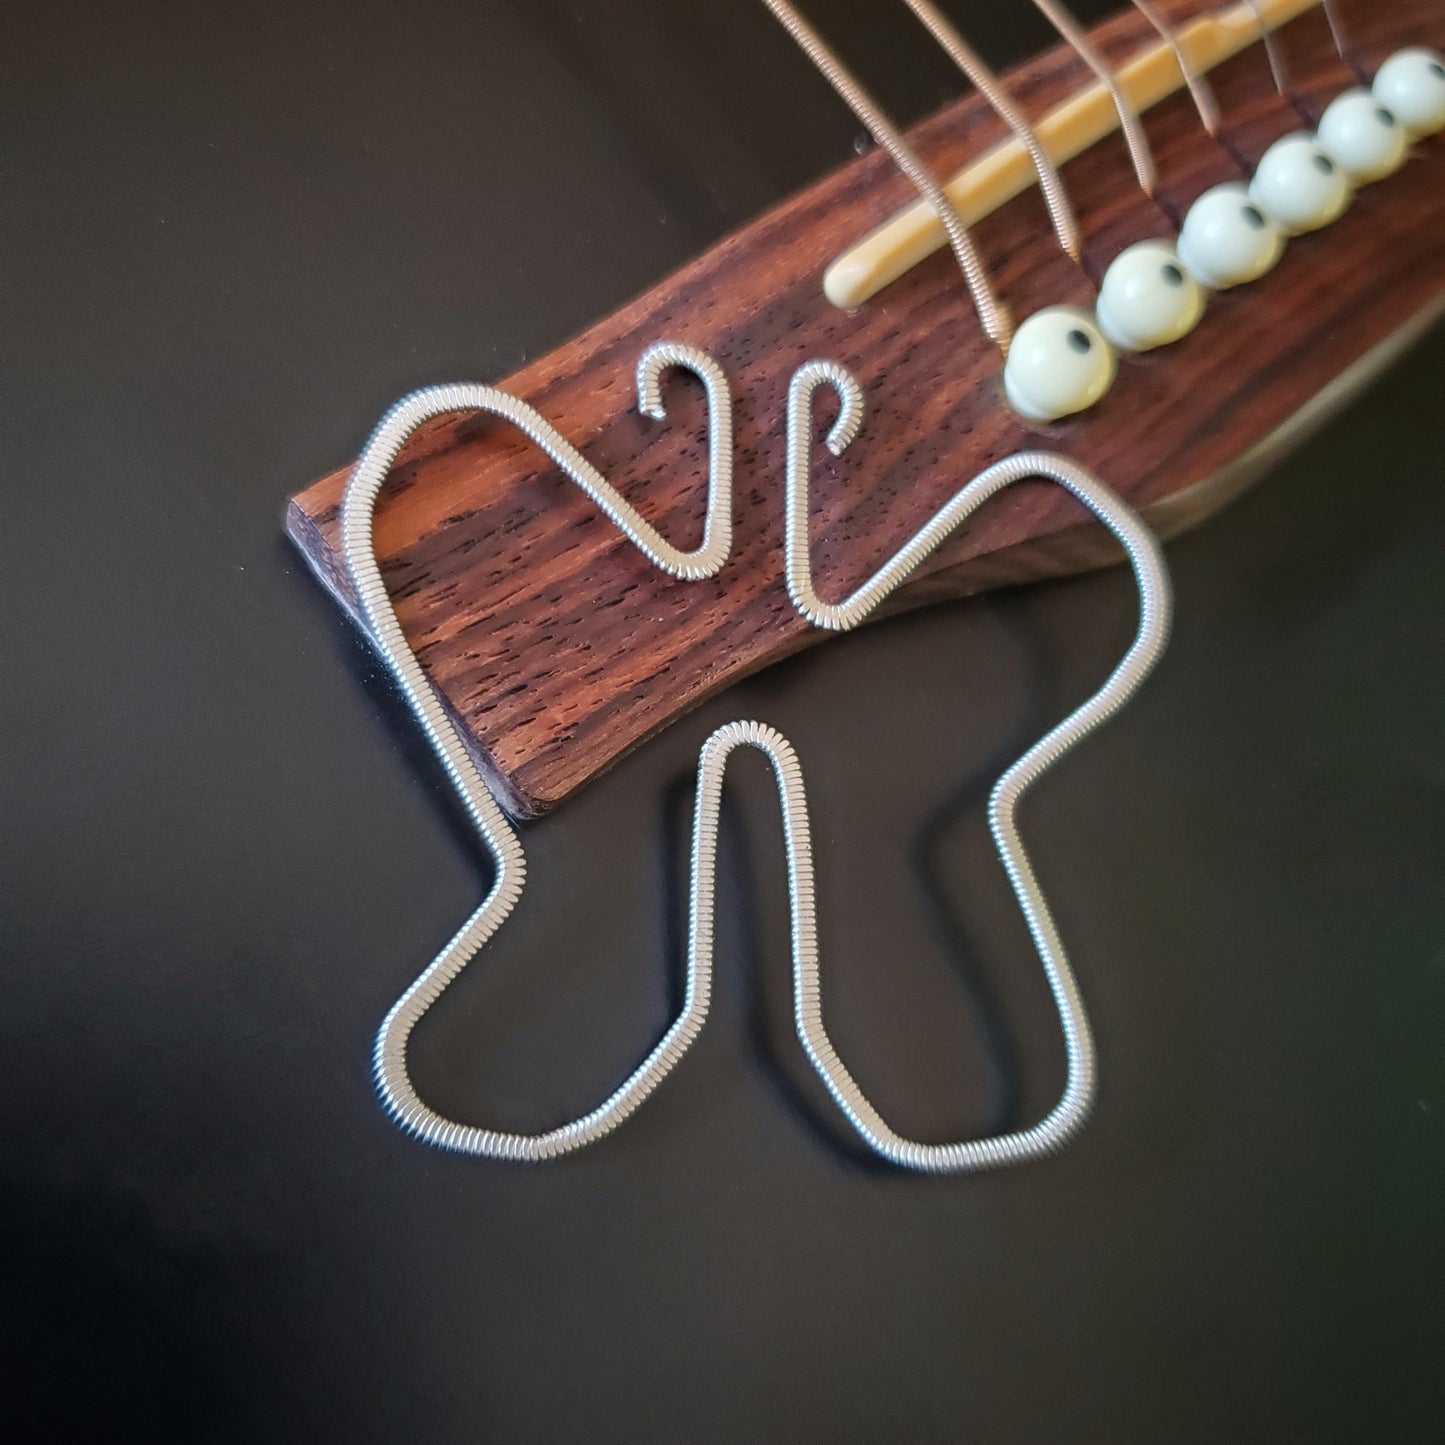 Butterfly Hammered Guitar String Bookmark